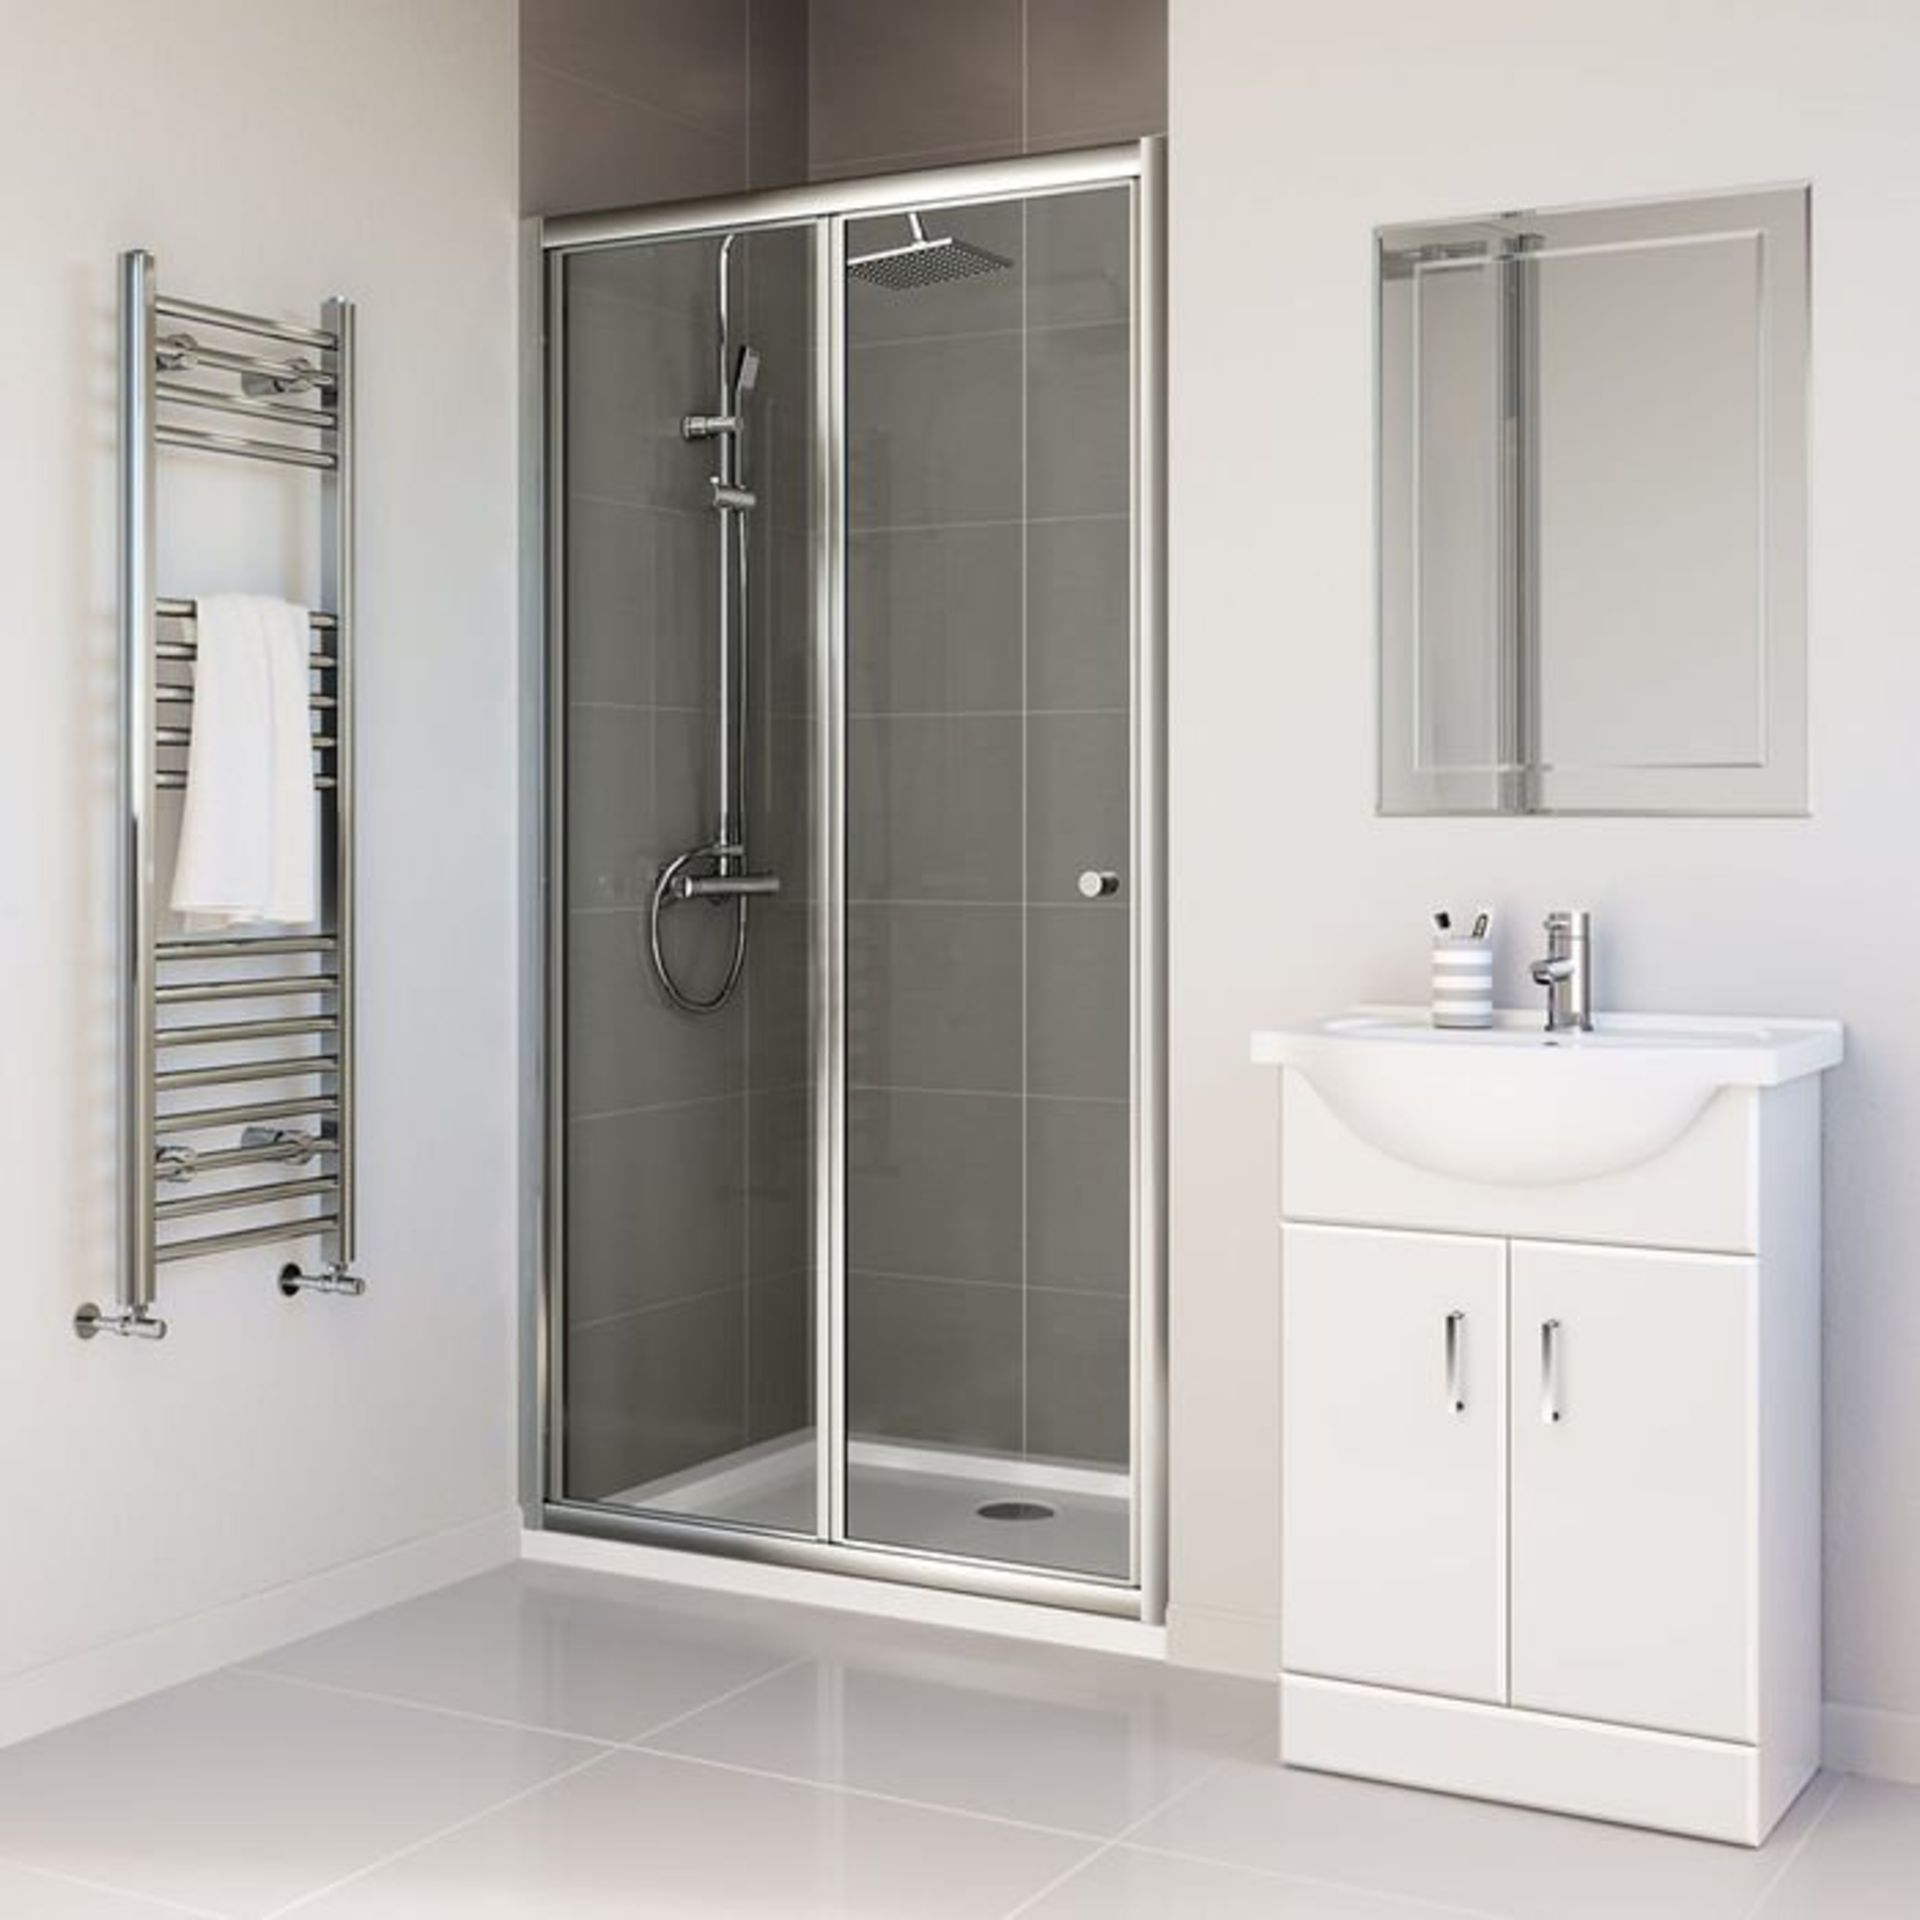 (G41) 1000mm - Elements Bi Fold Shower Door. RRP £299.99. 4mm Safety Glass Fully waterproof tested - Image 3 of 8